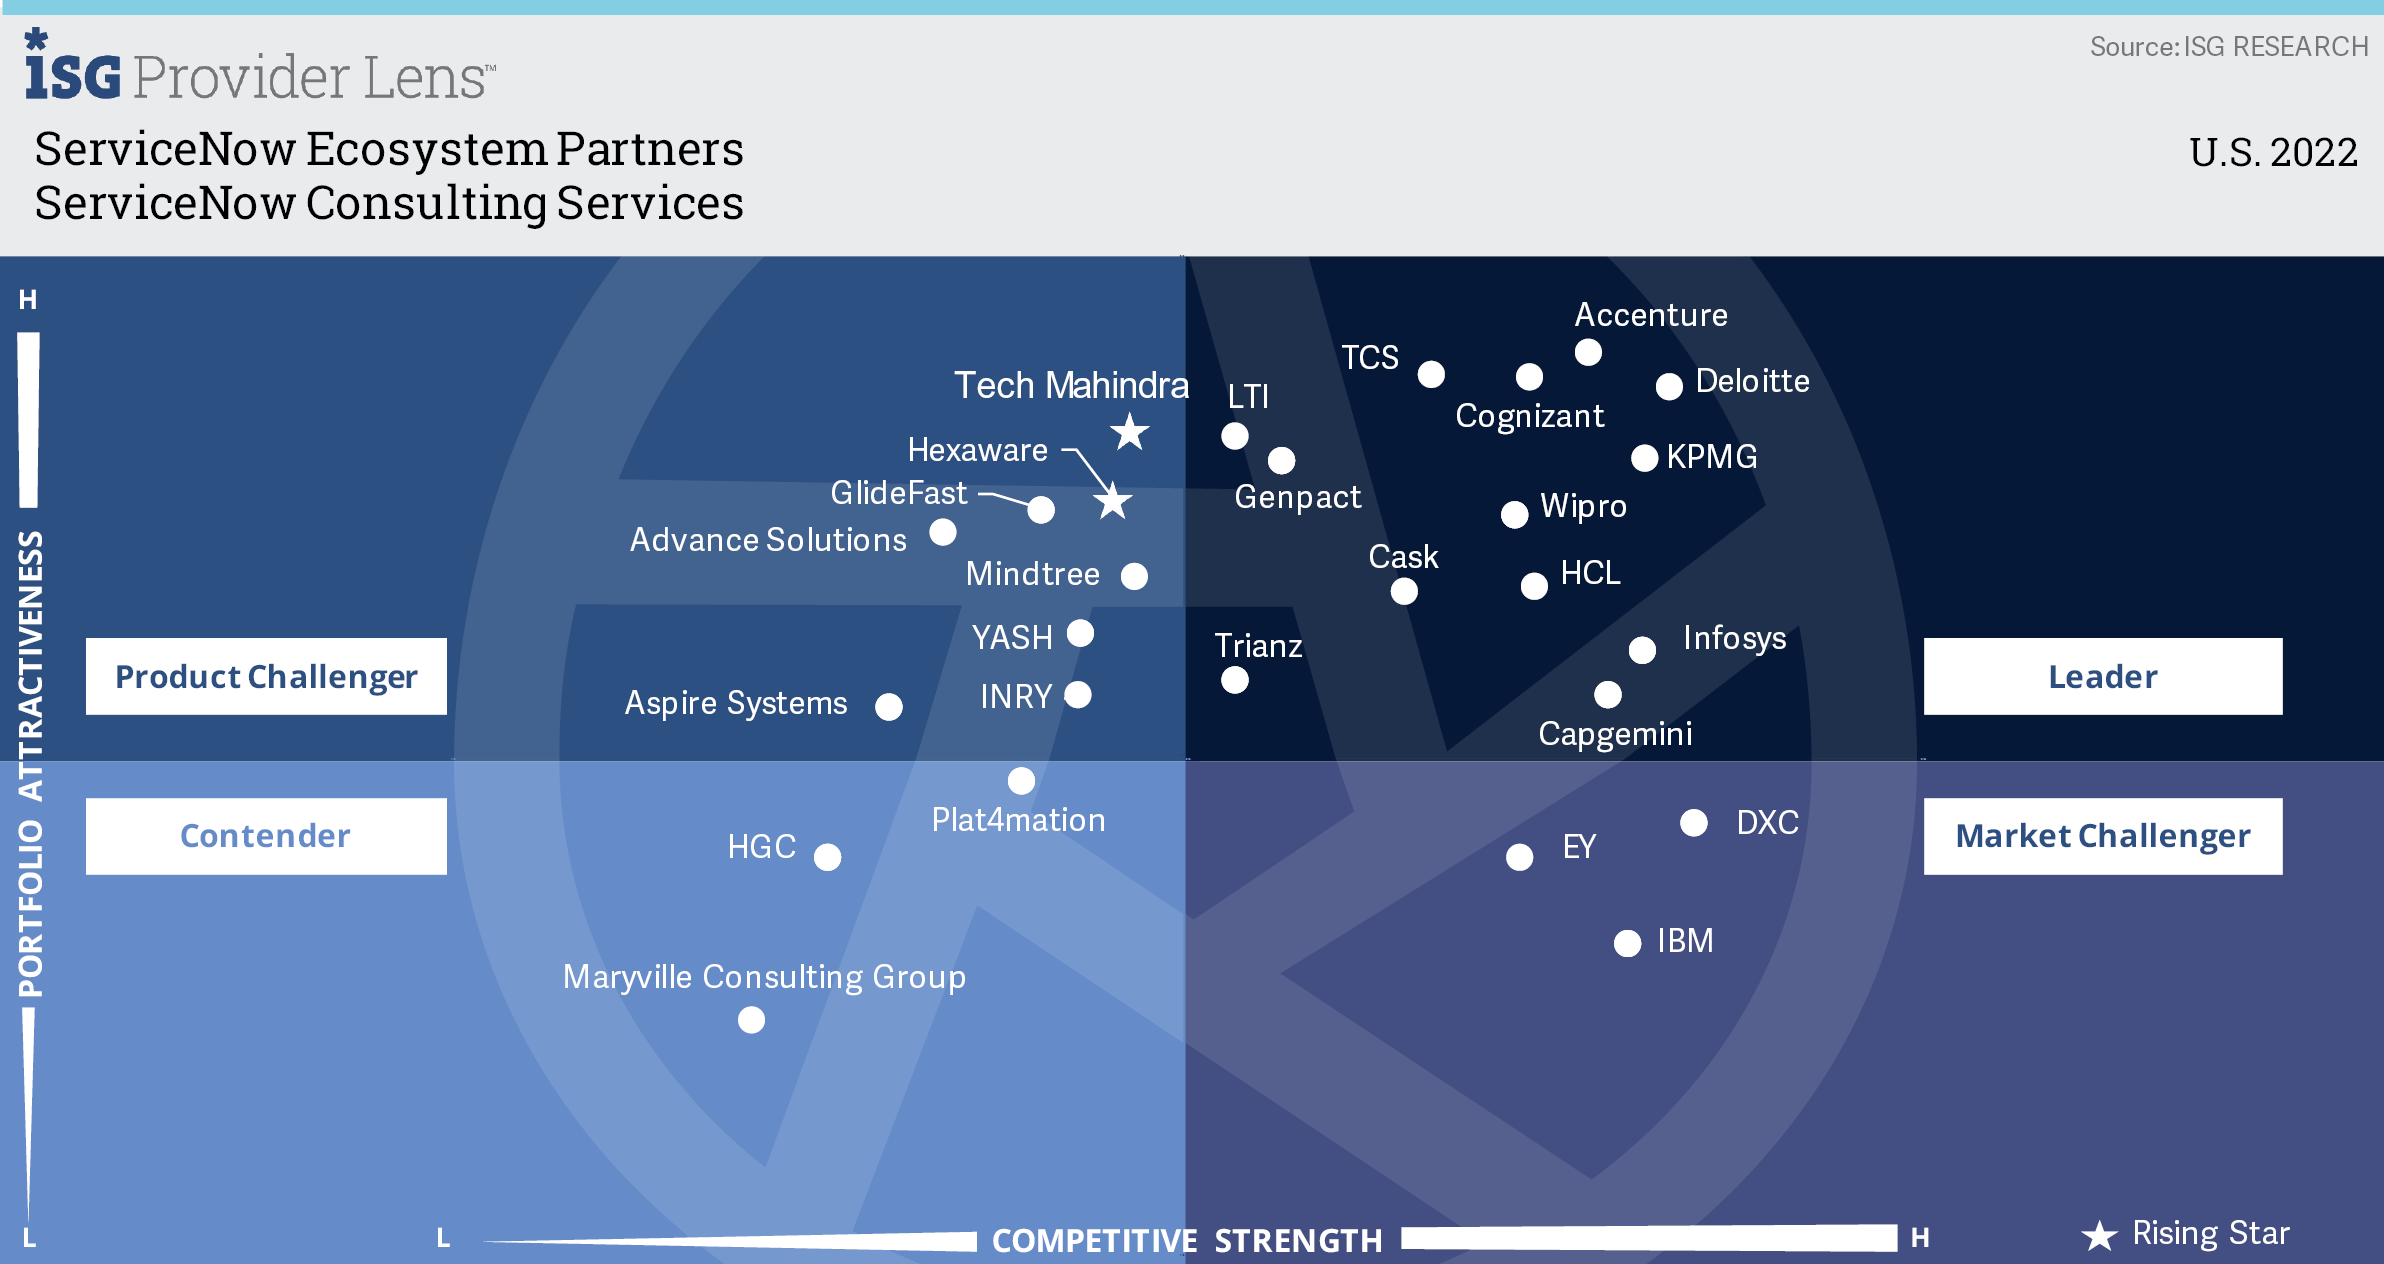 Leader - ServiceNow Consulting Services